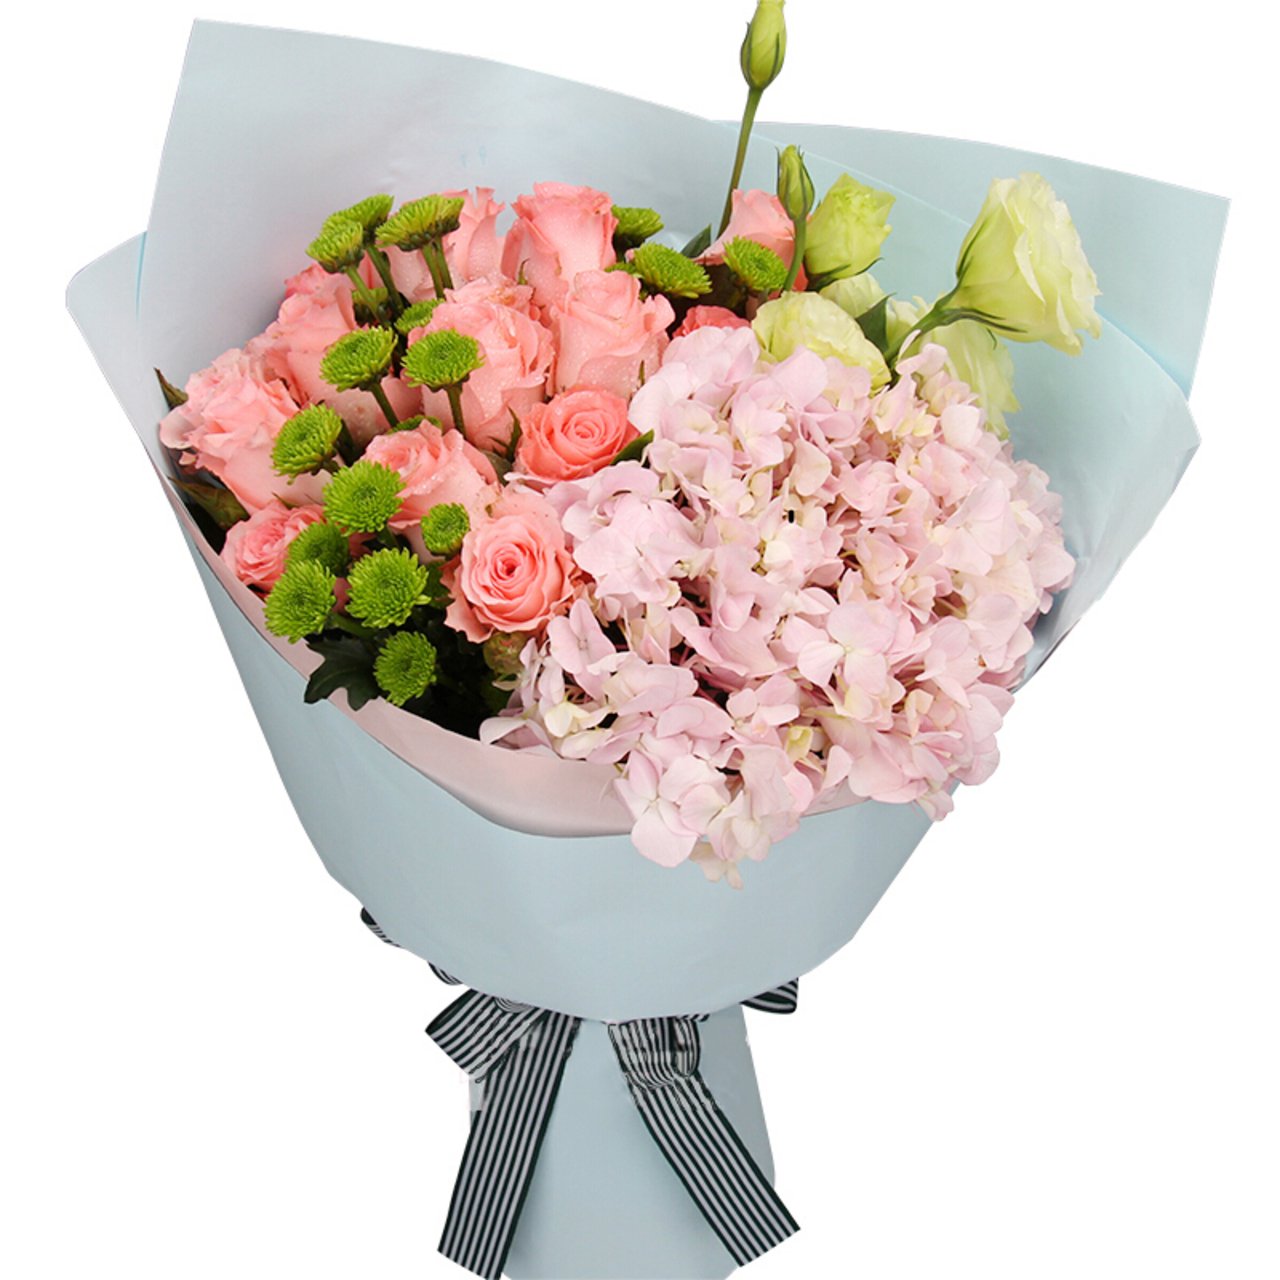 Love is the only(
19 Diana Pink Roses)